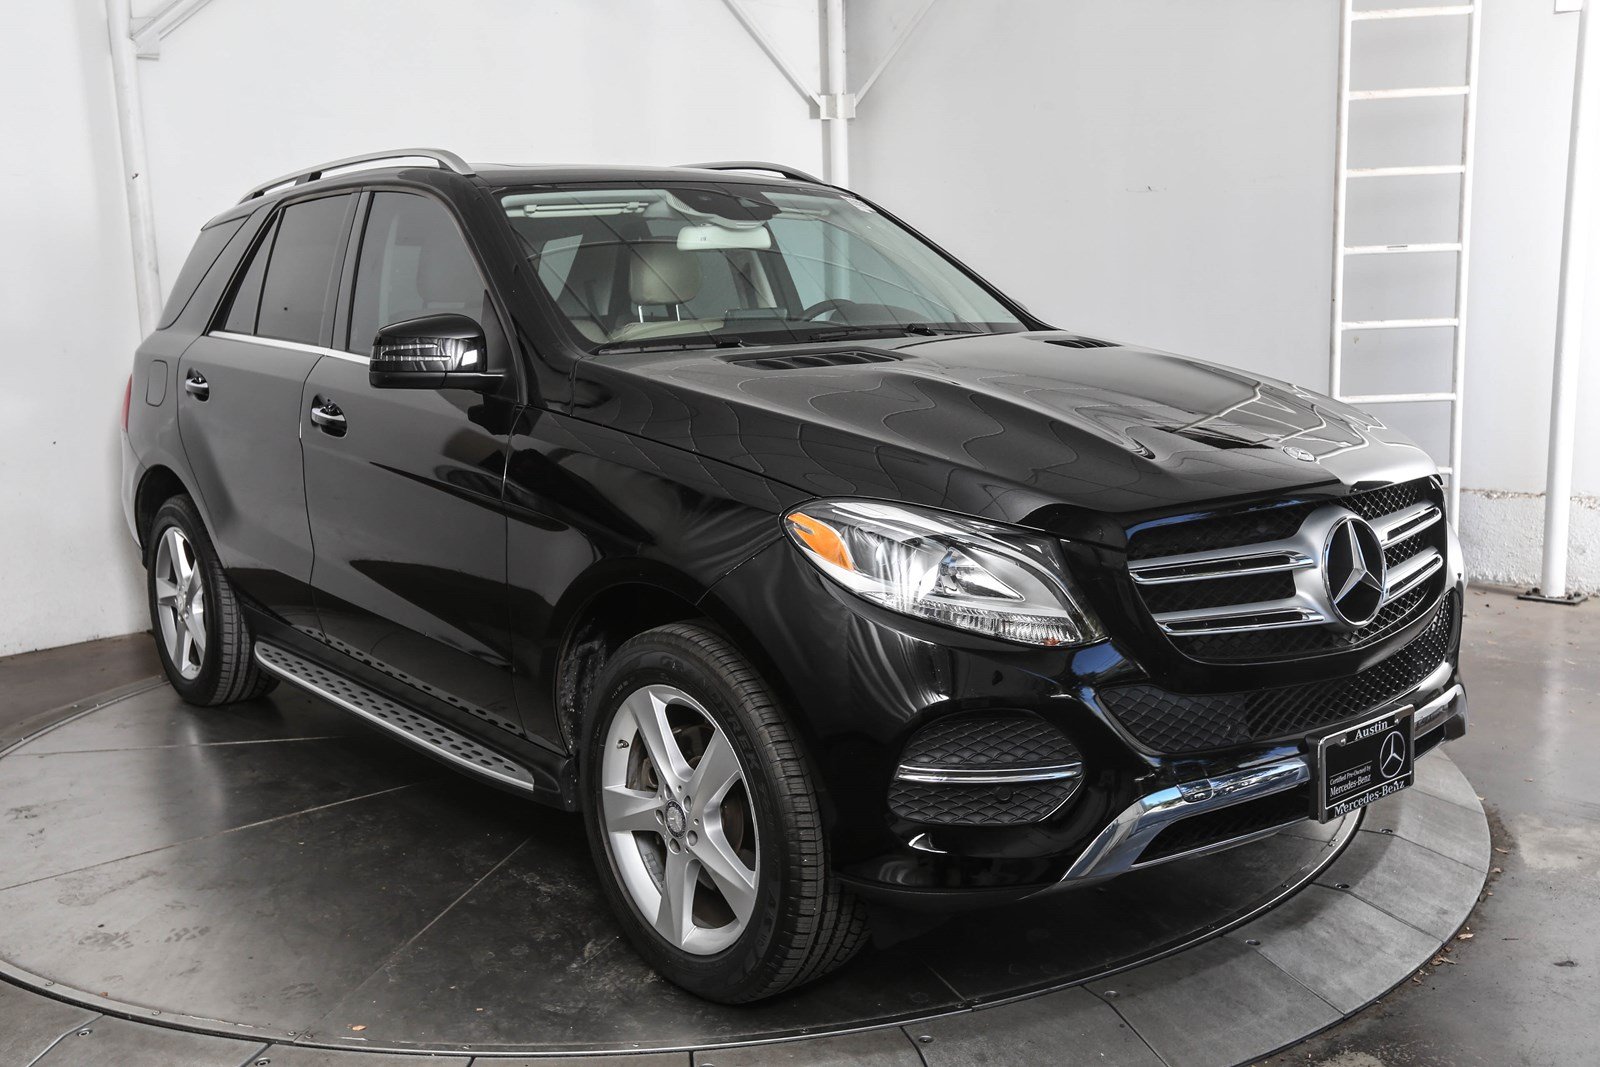 Certified Pre-Owned 2017 Mercedes-Benz GLE GLE 350 SUV in Austin # ...